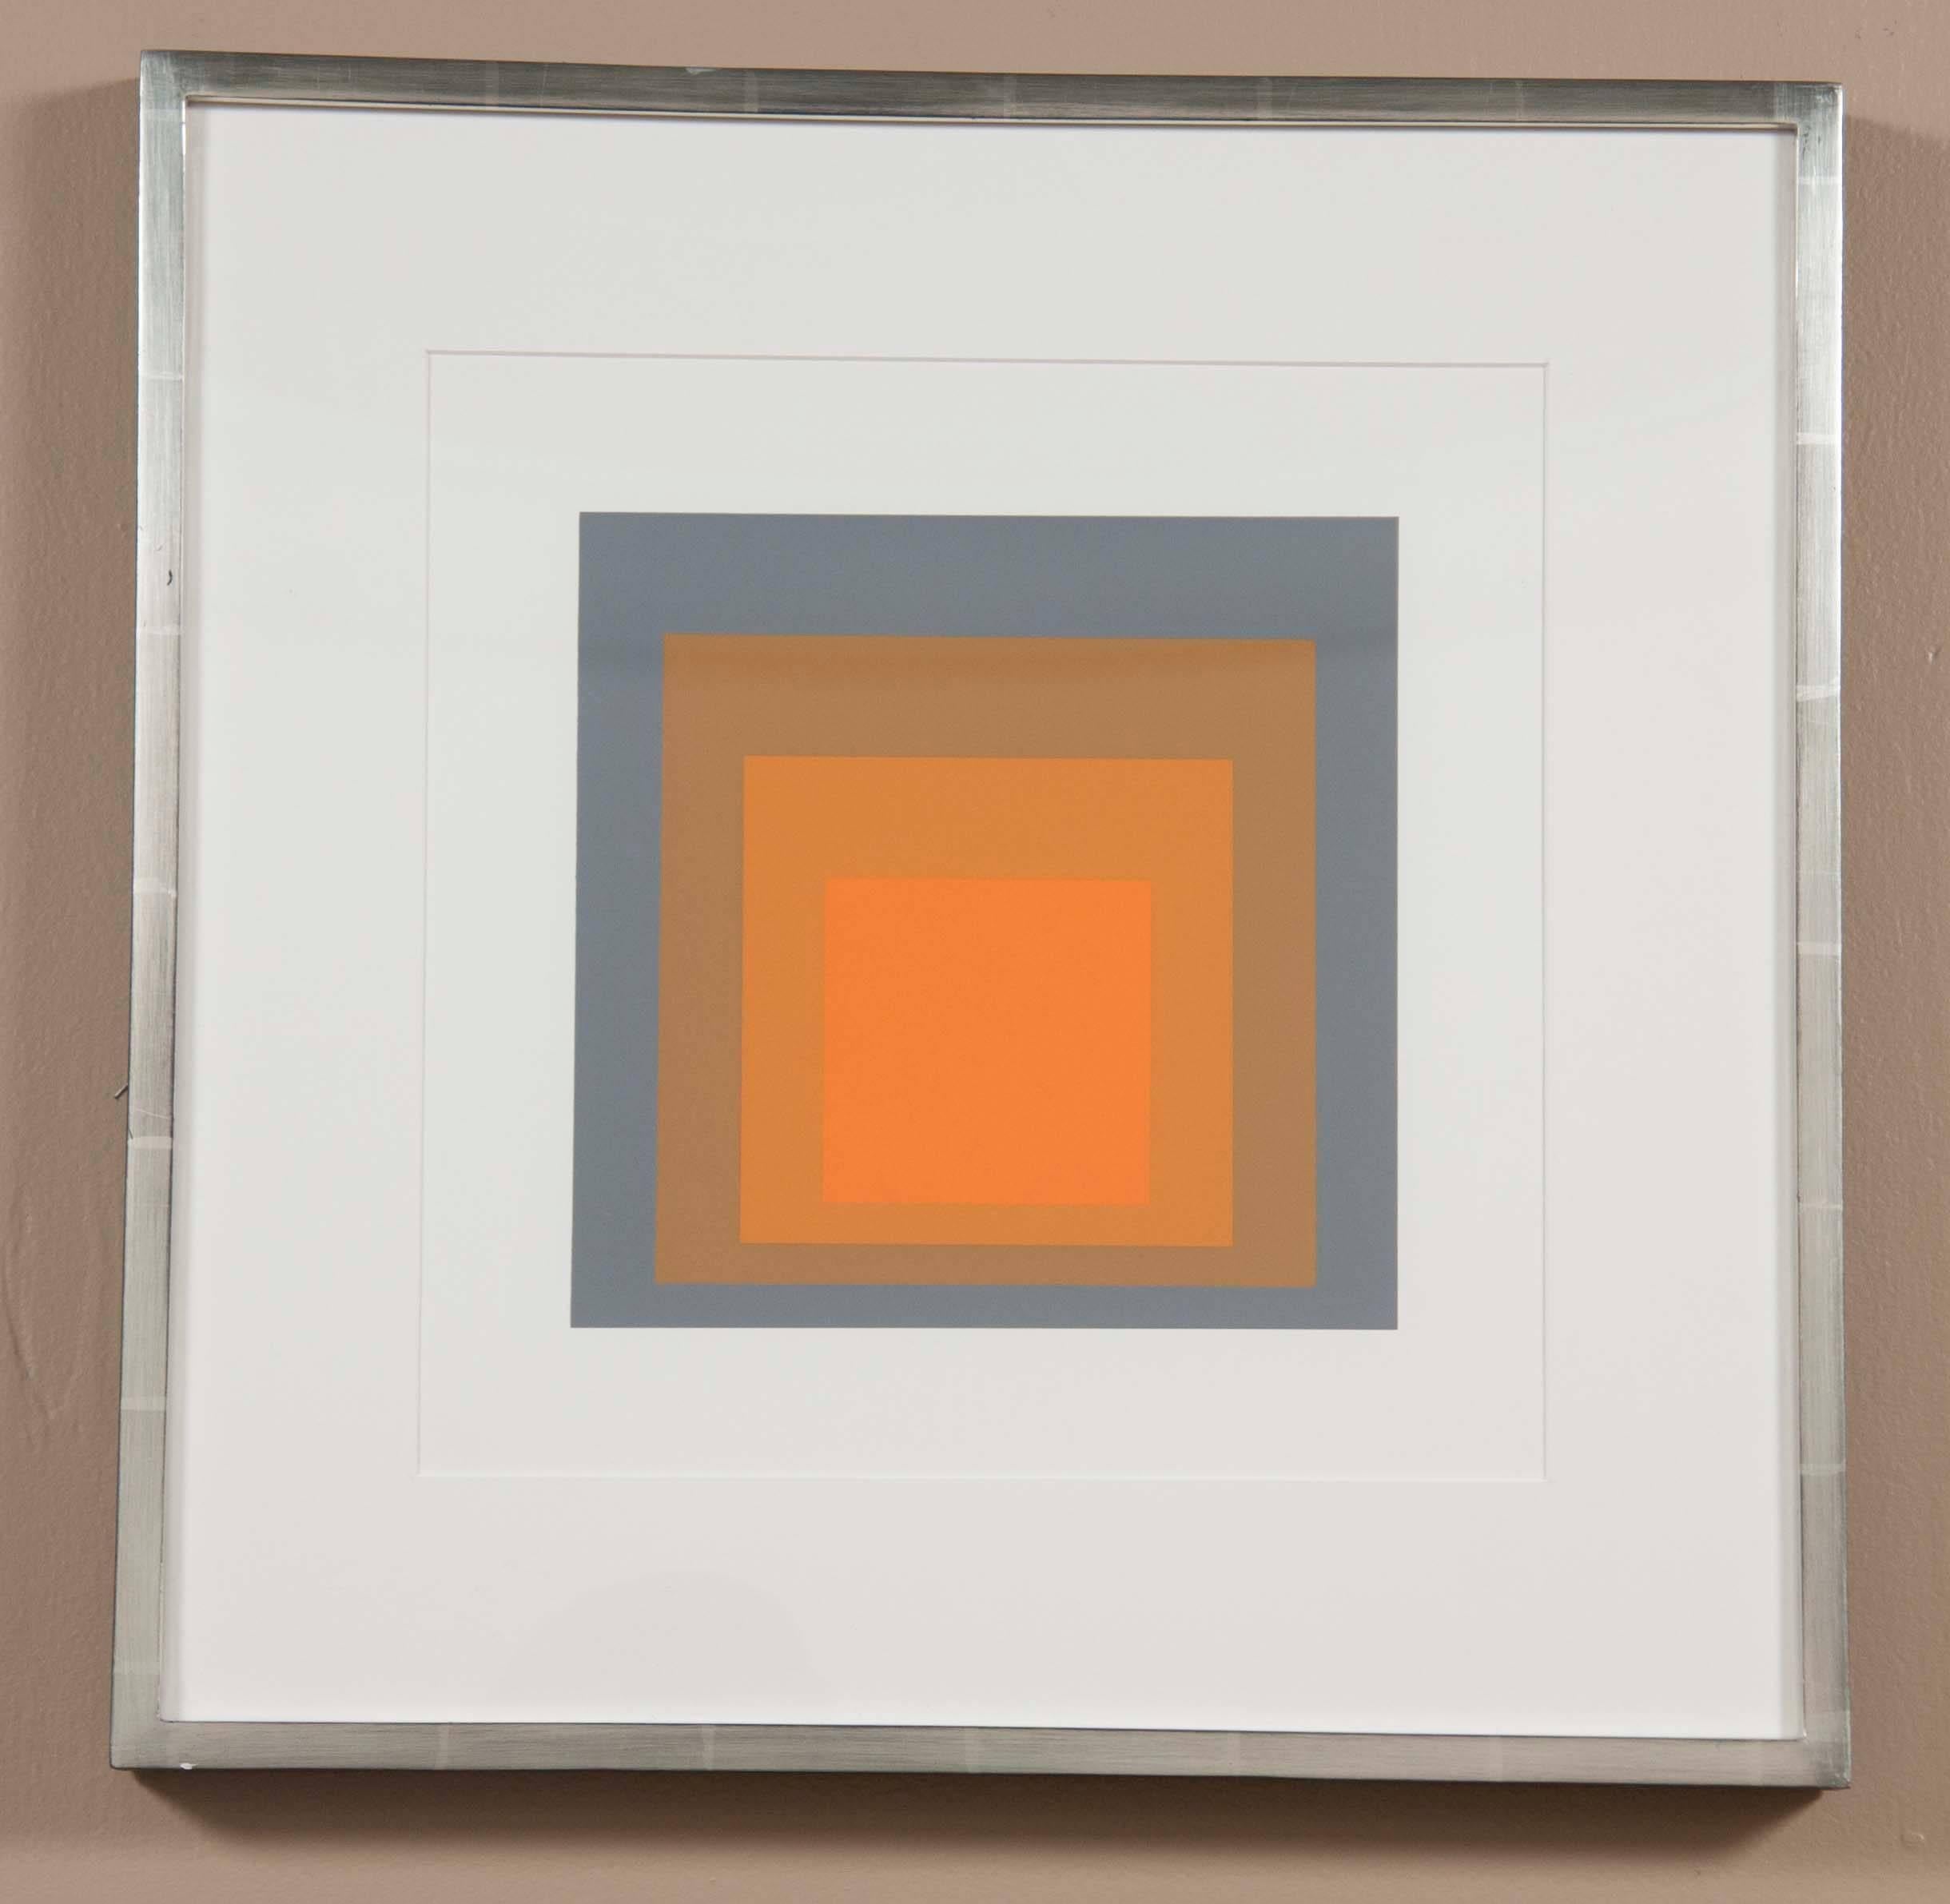 Modern Josef Albers Homage to the Square from Formations: Articulation, 1972 Portfolio